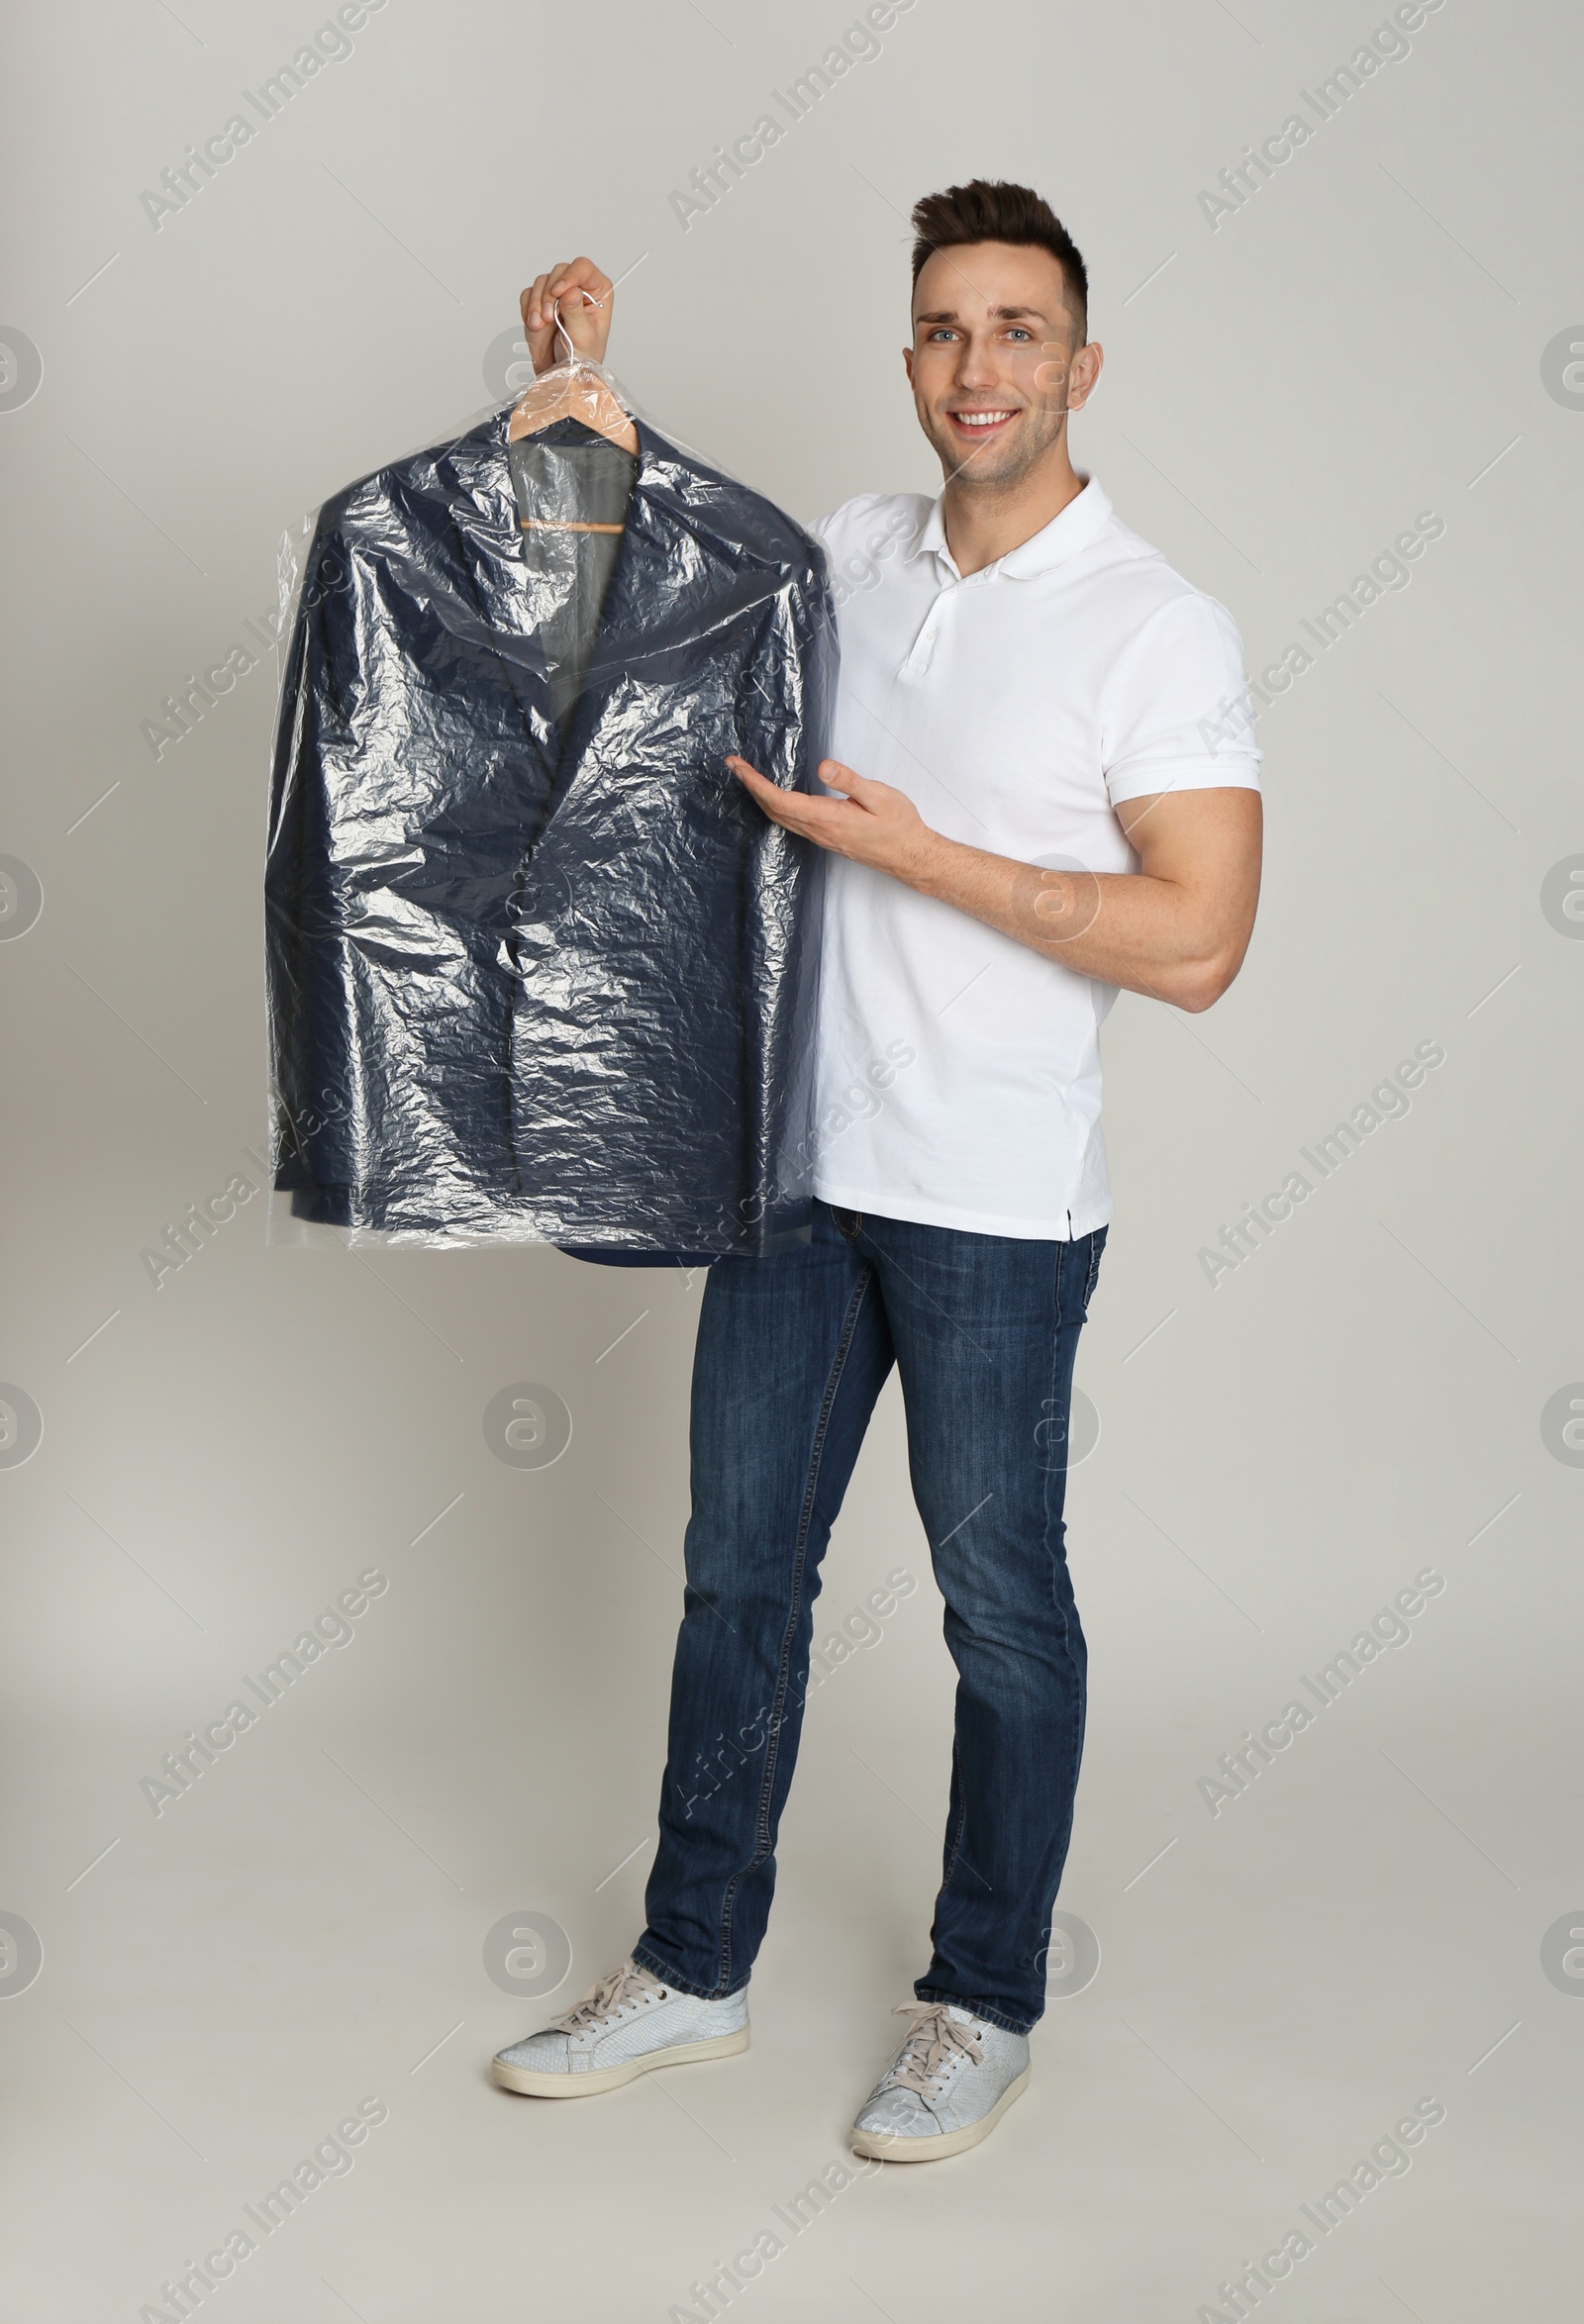 Photo of Man holding hanger with jacket in plastic bag on light grey background. Dry-cleaning service